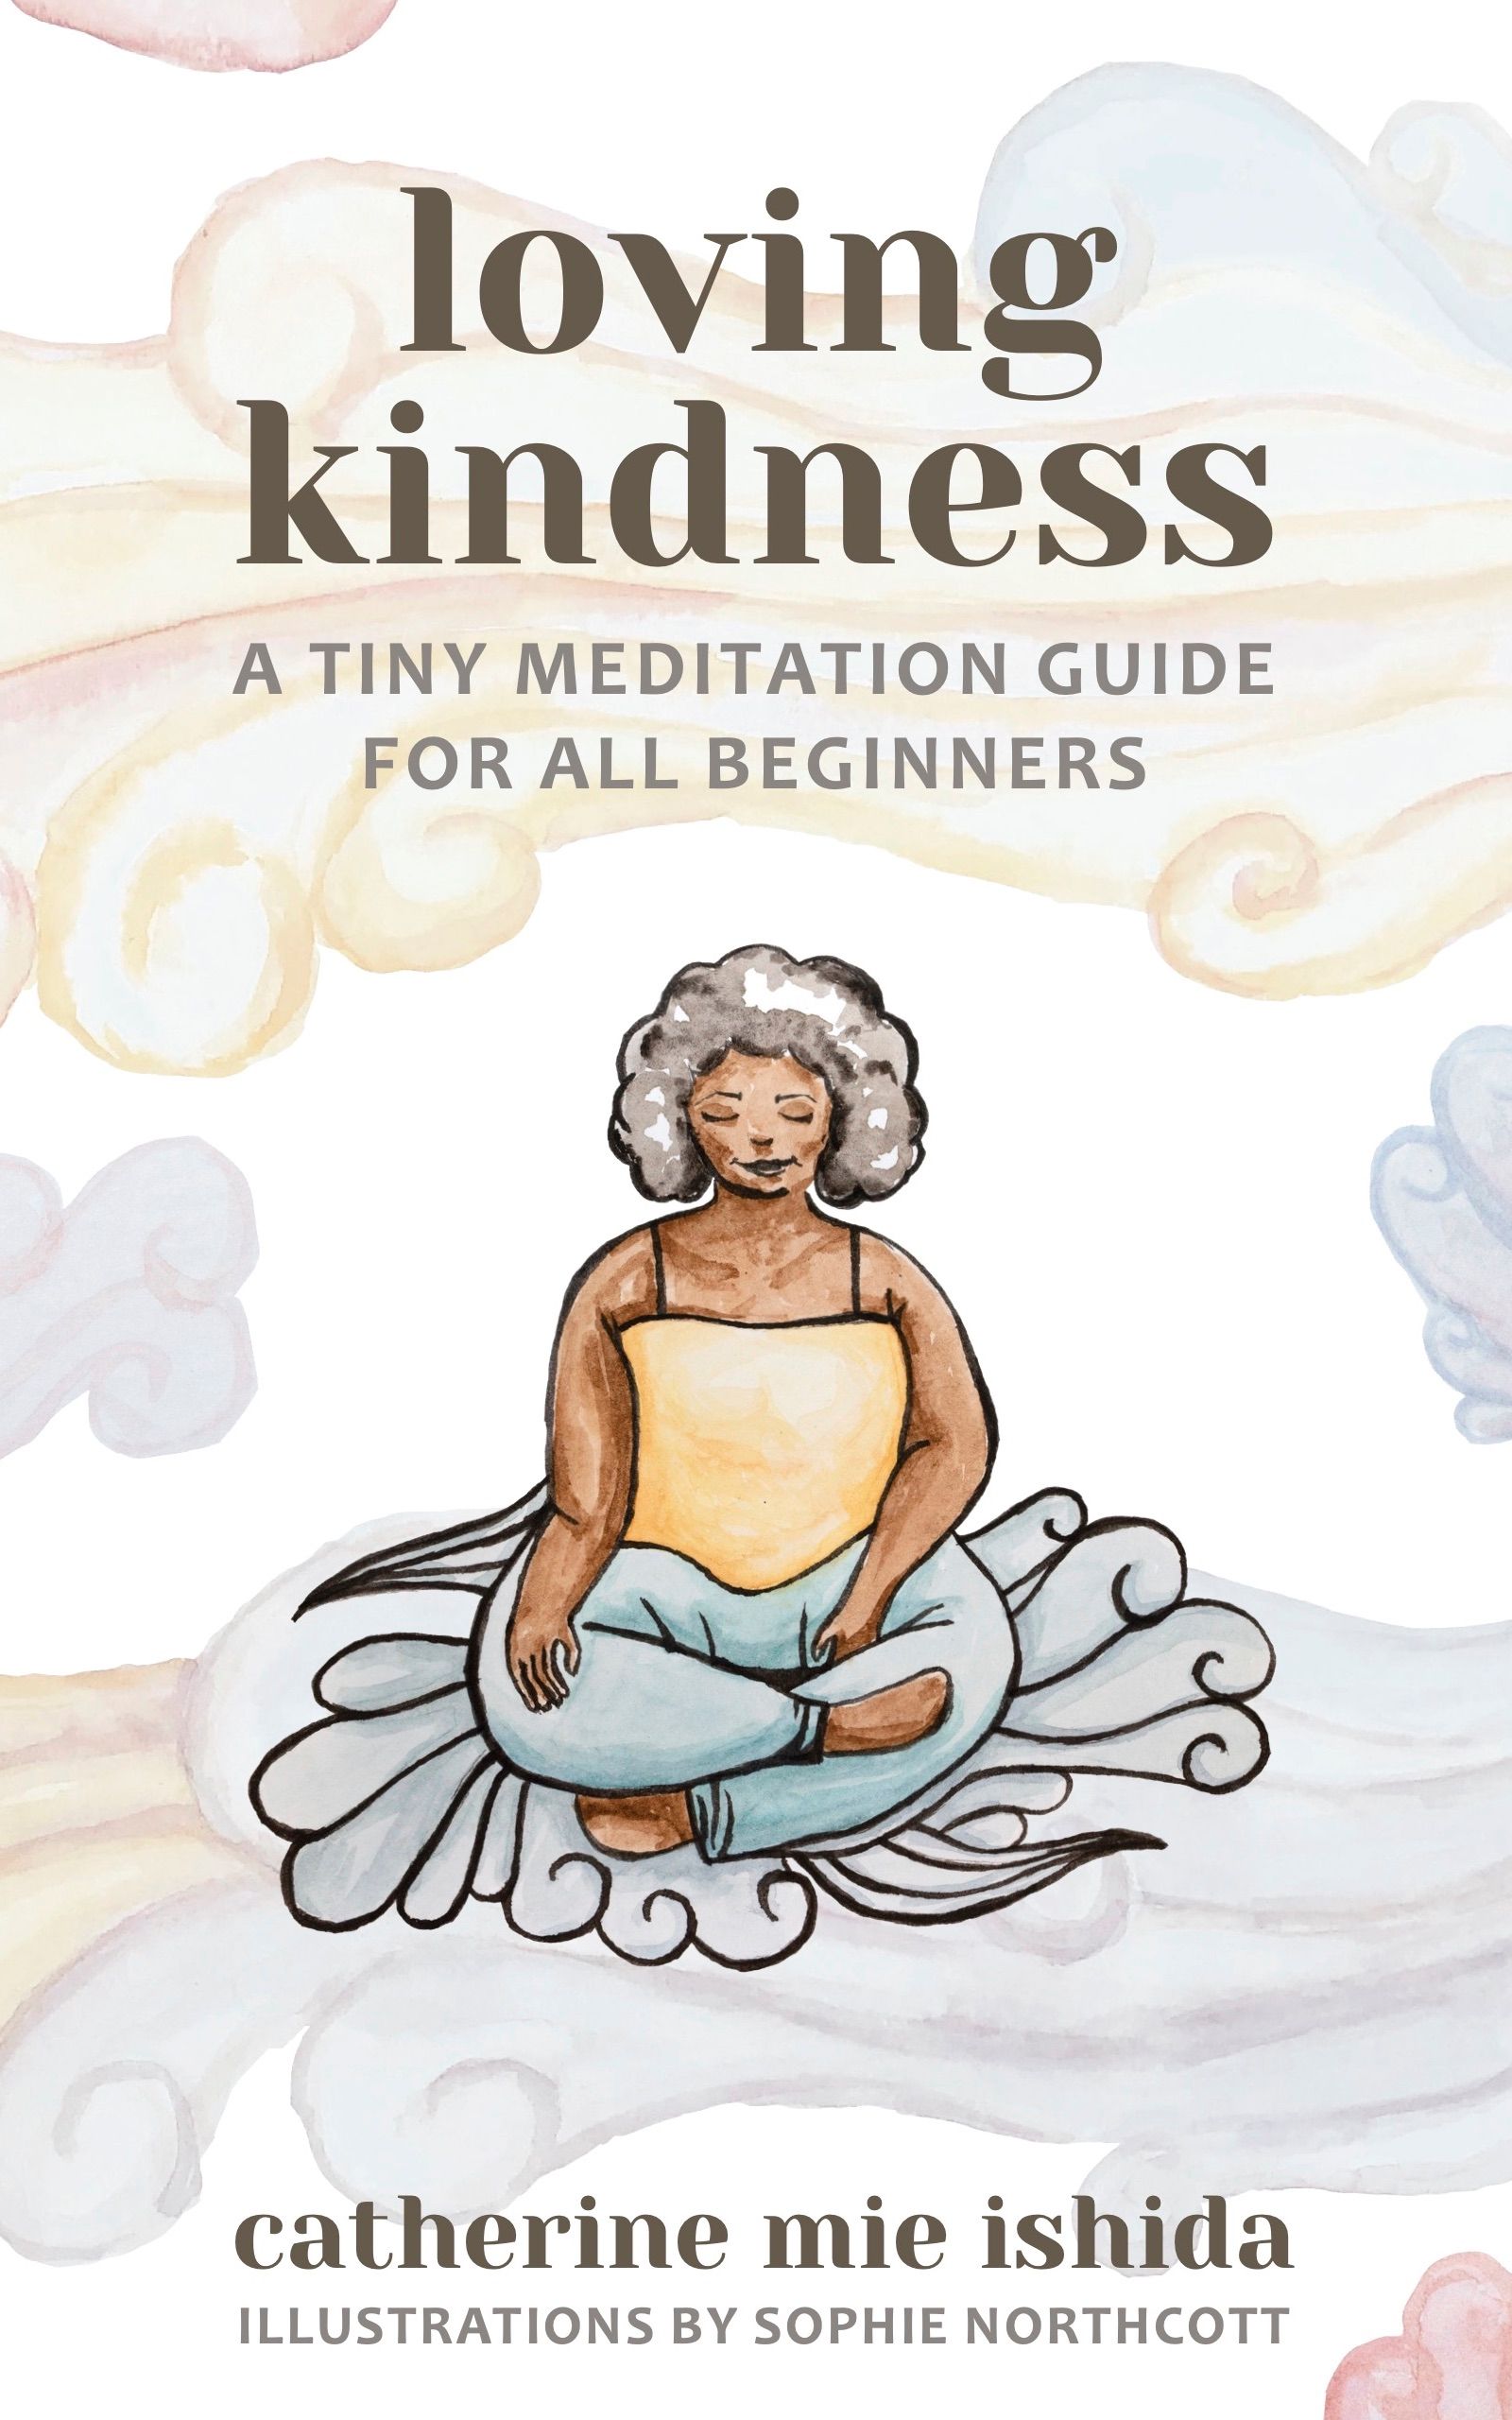 Loving-Kindness: A Tiny Meditation Guide for All Beginners